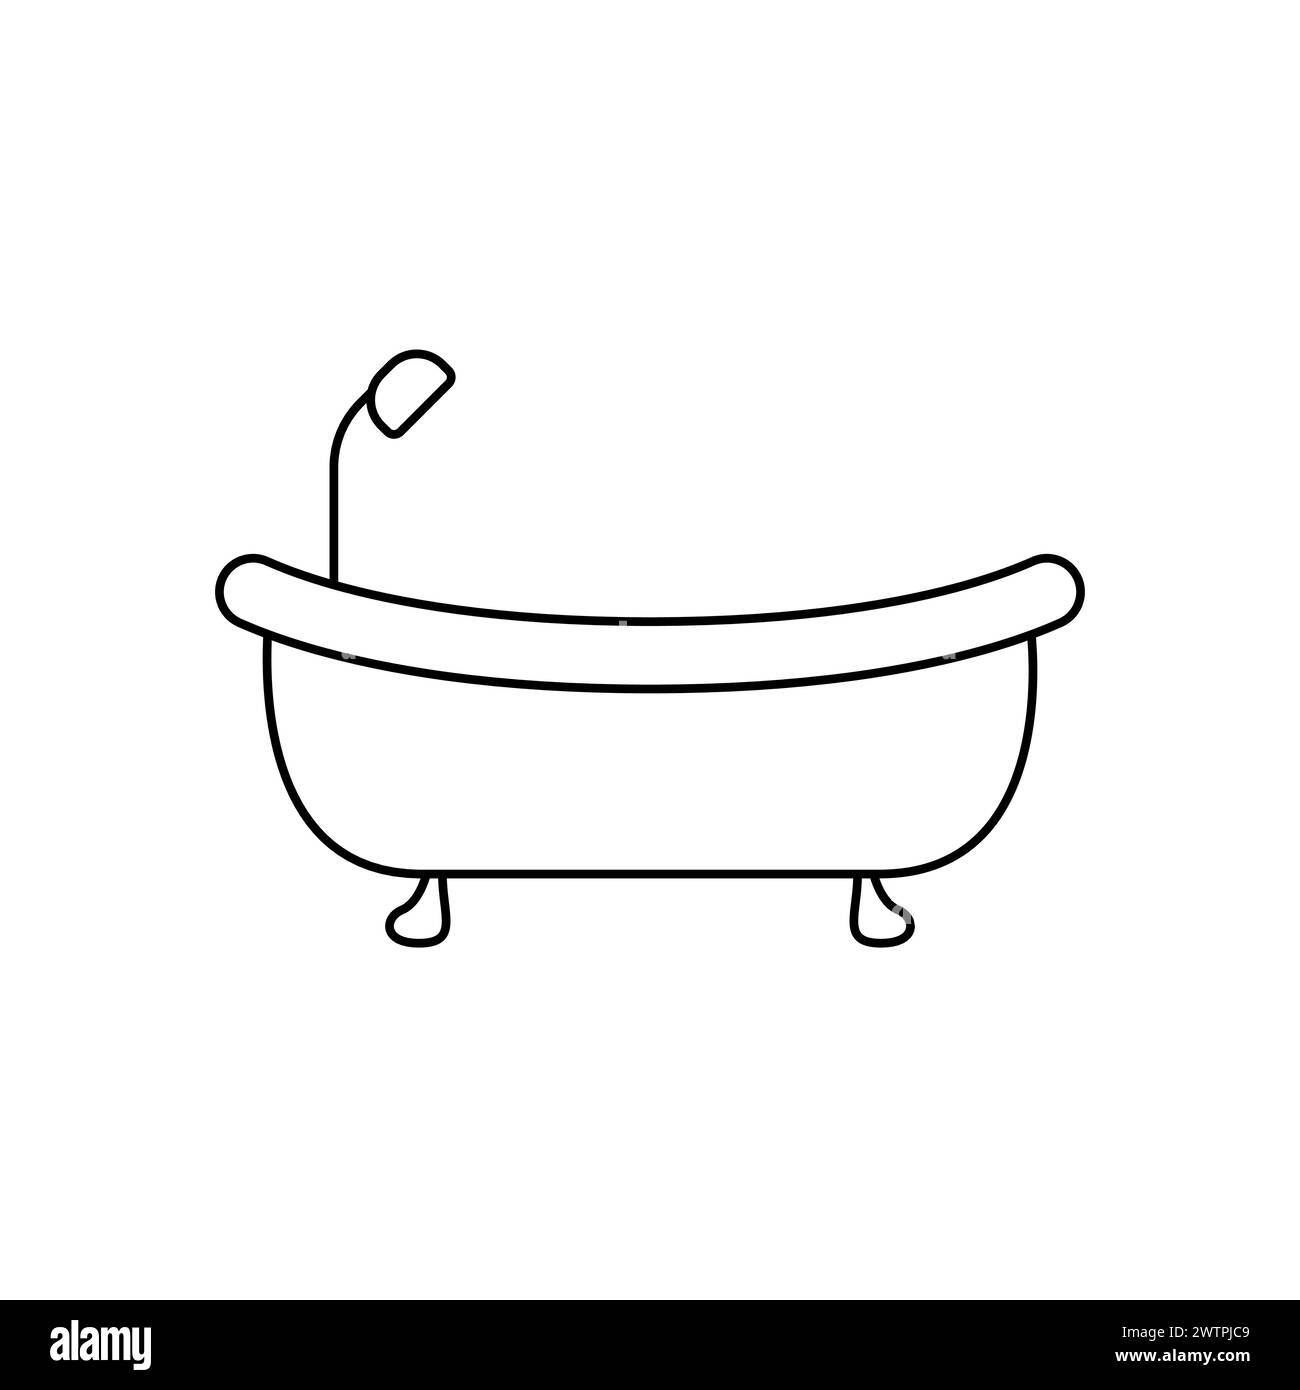 Outline shower logo vector. Concept of bathing and washing icon. Ceramic bathtub in a simple style. Concept for applications bath symbol for web desig Stock Vector